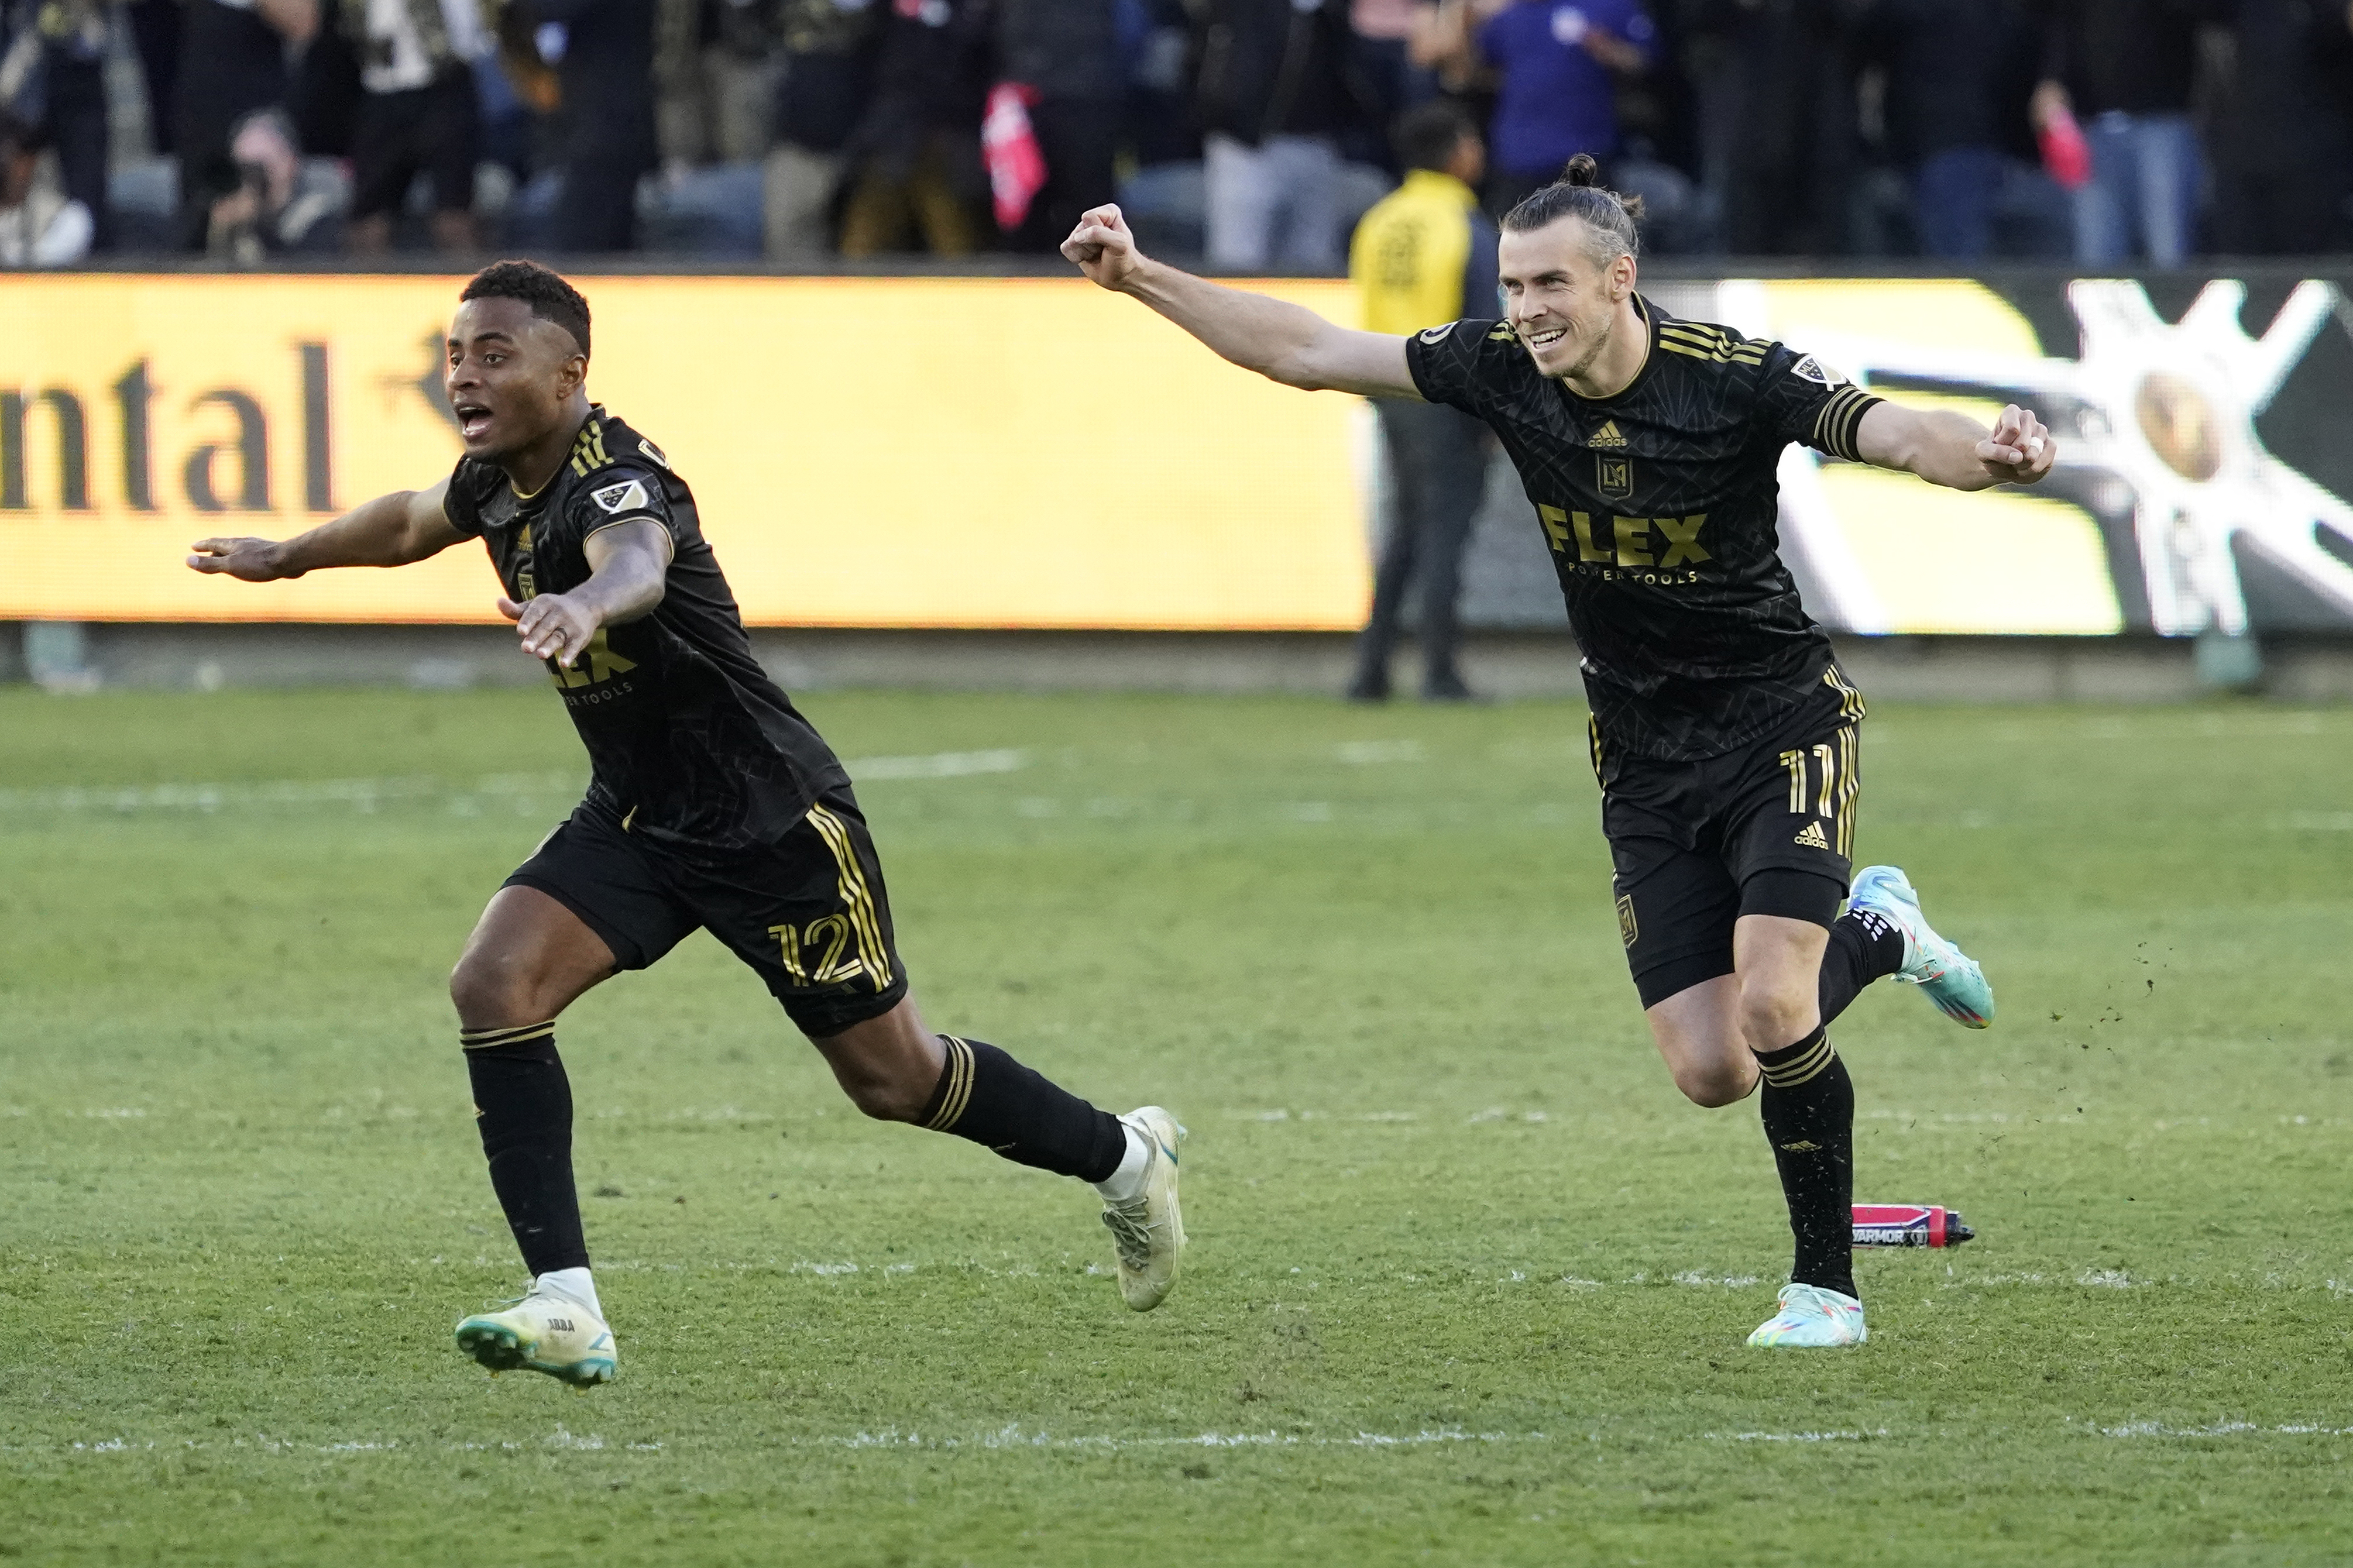 Gareth Bale scores first goal for LAFC in his second game in MLS